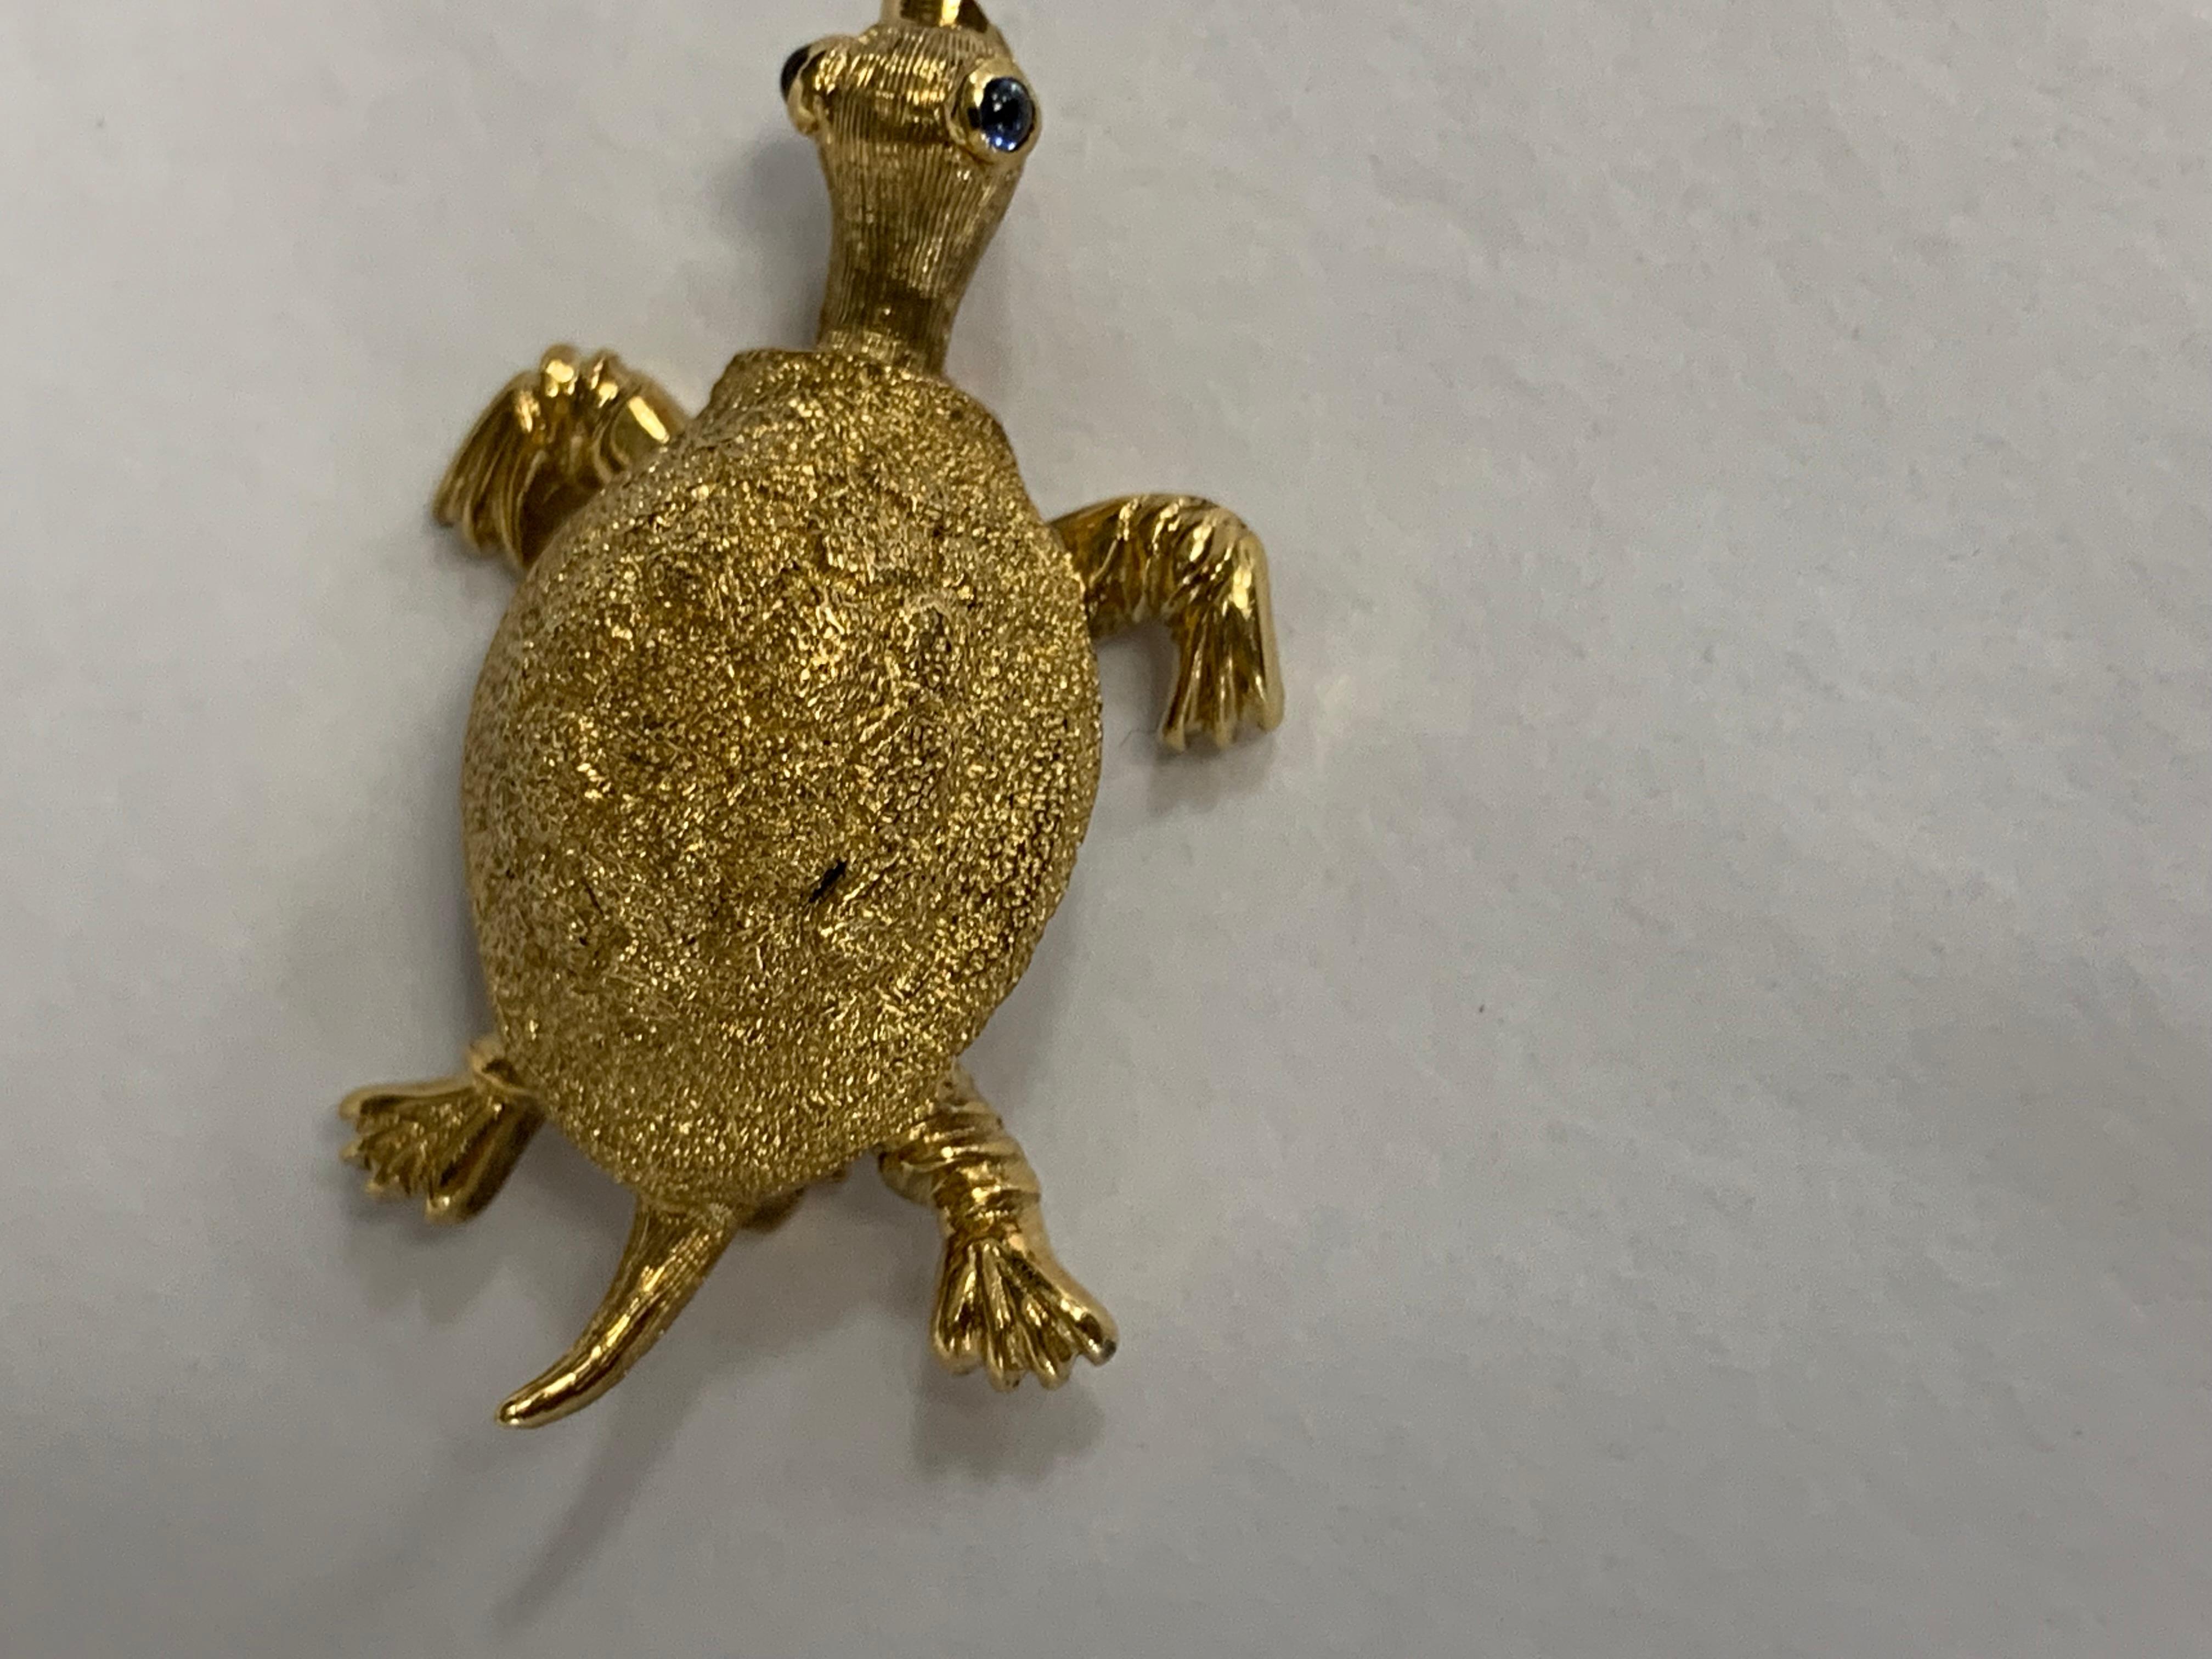 18k texture turtle pin by Tiffany and Company
2 cabochon sapphires for eyes
8.7 grams